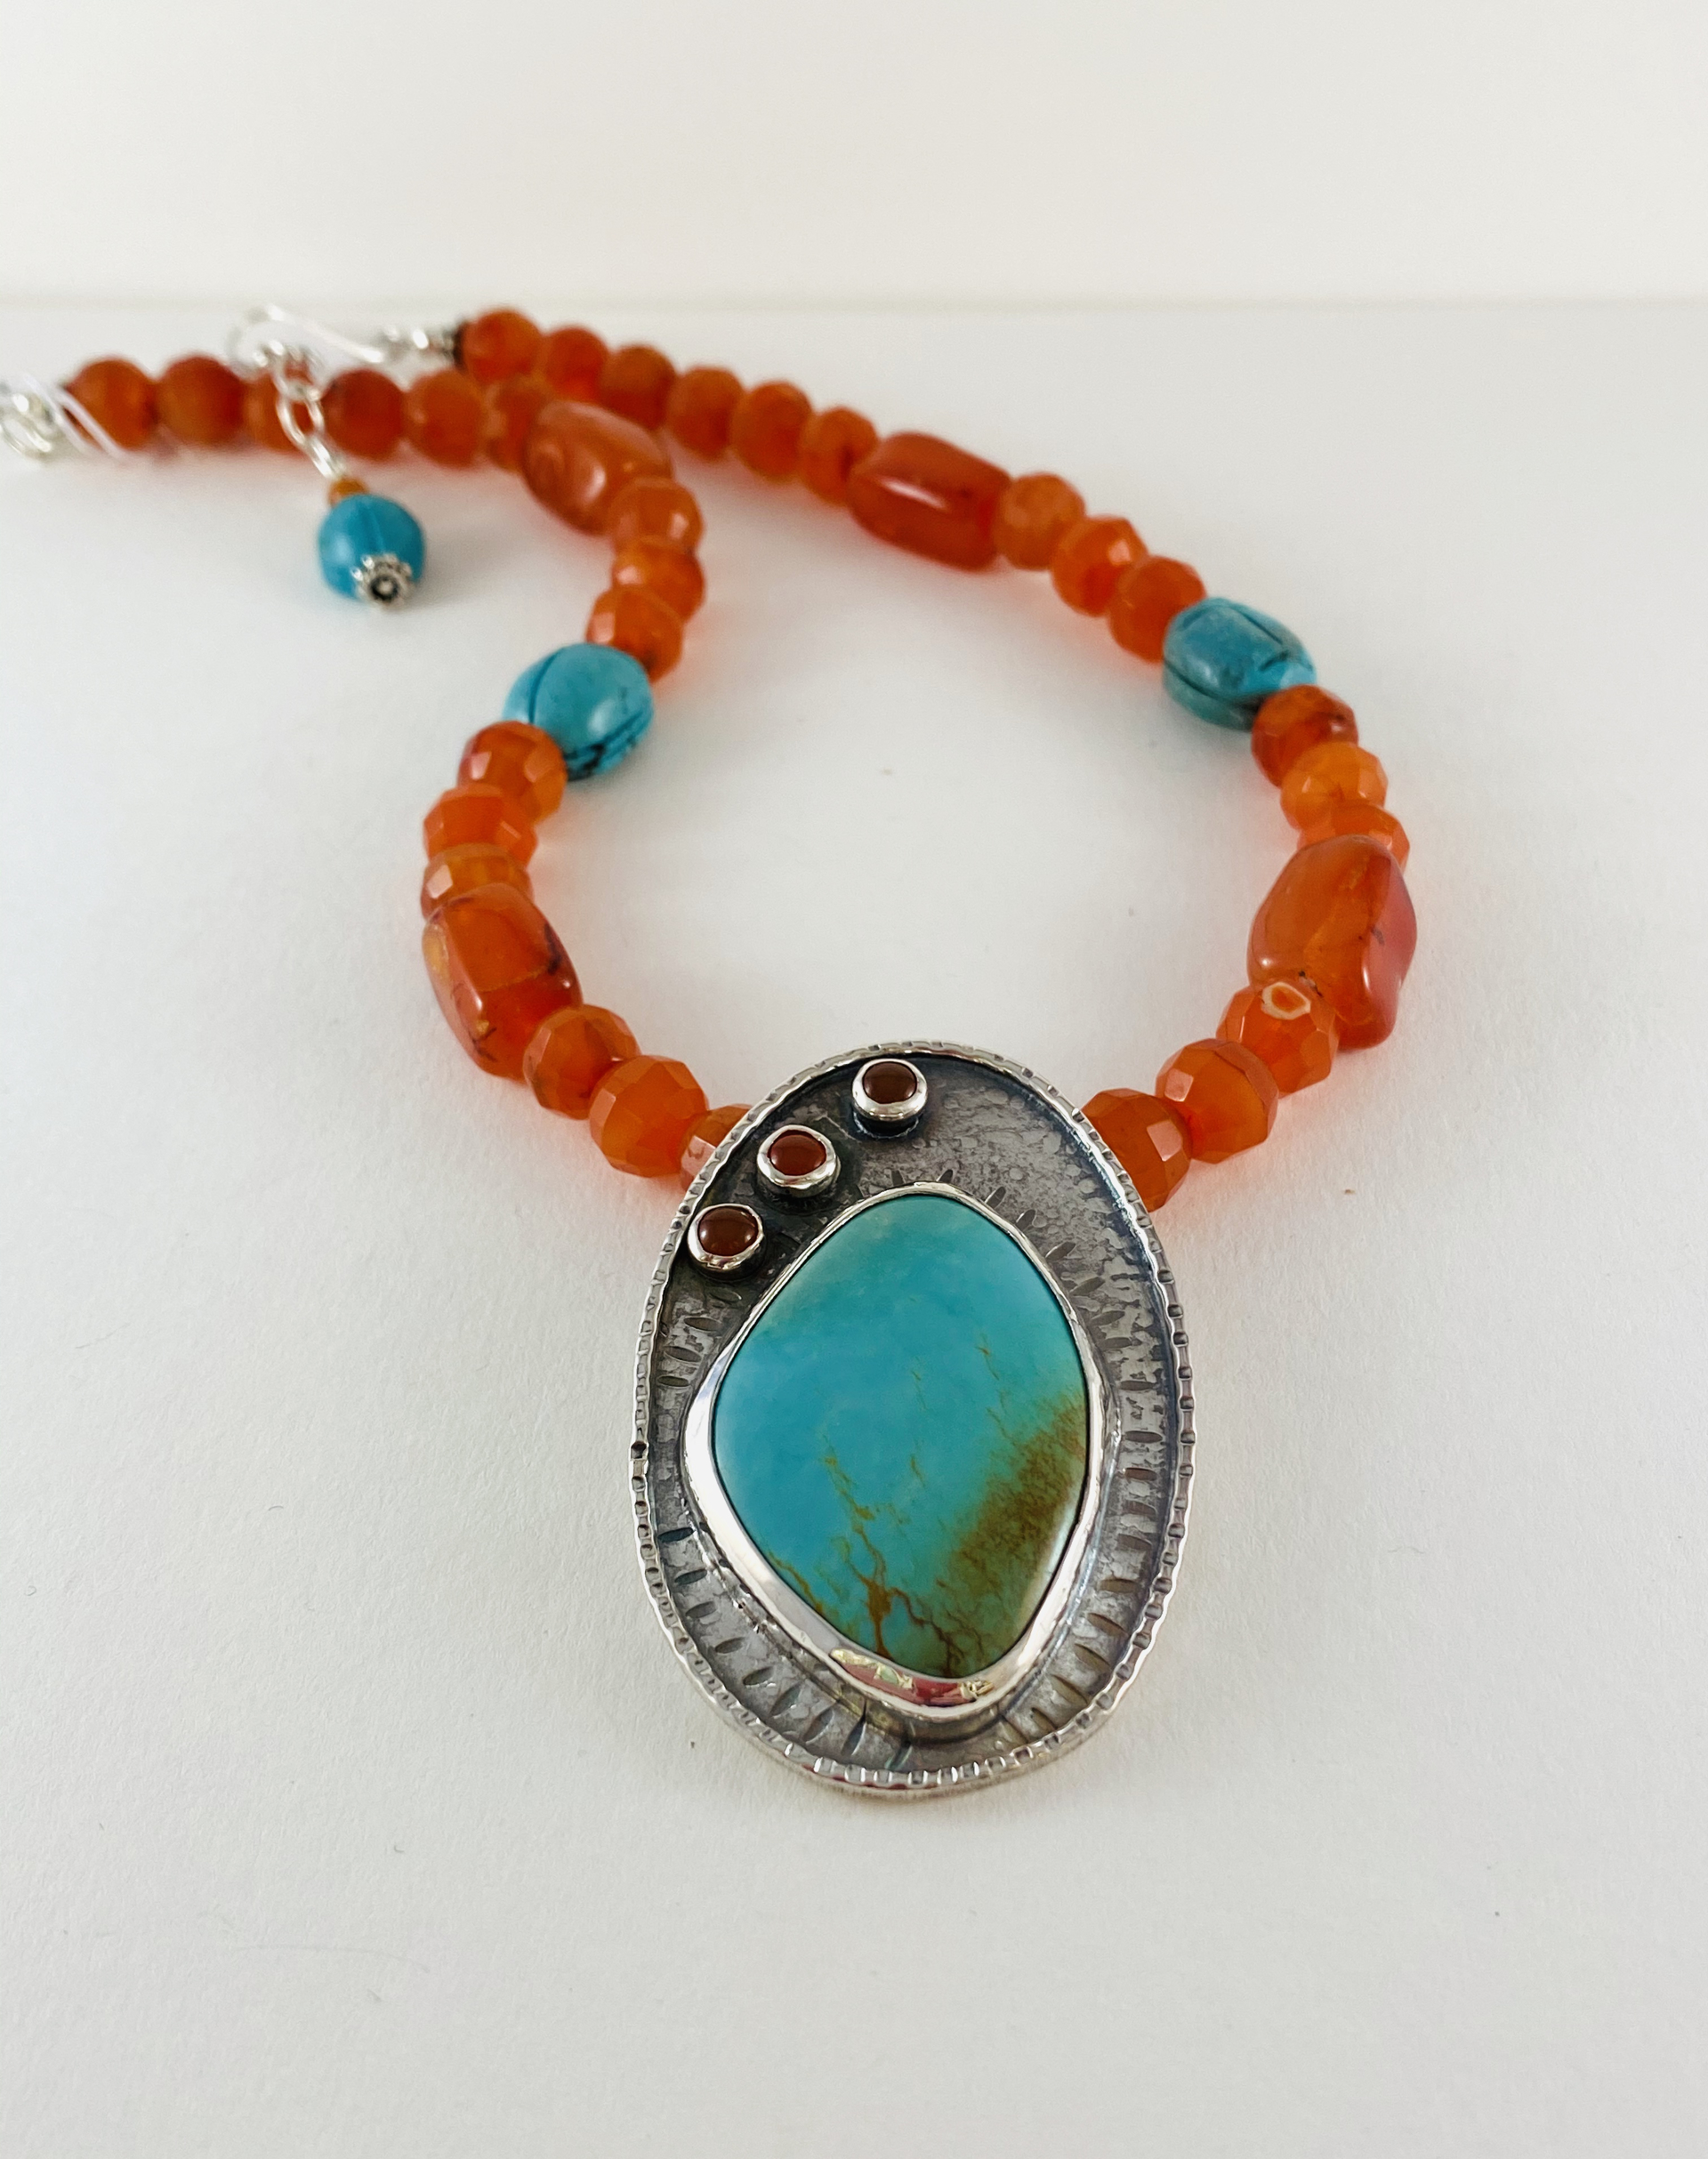 #133 Turquoise and Silver Pendant, Carnelian Necklace  by Anne Bivens